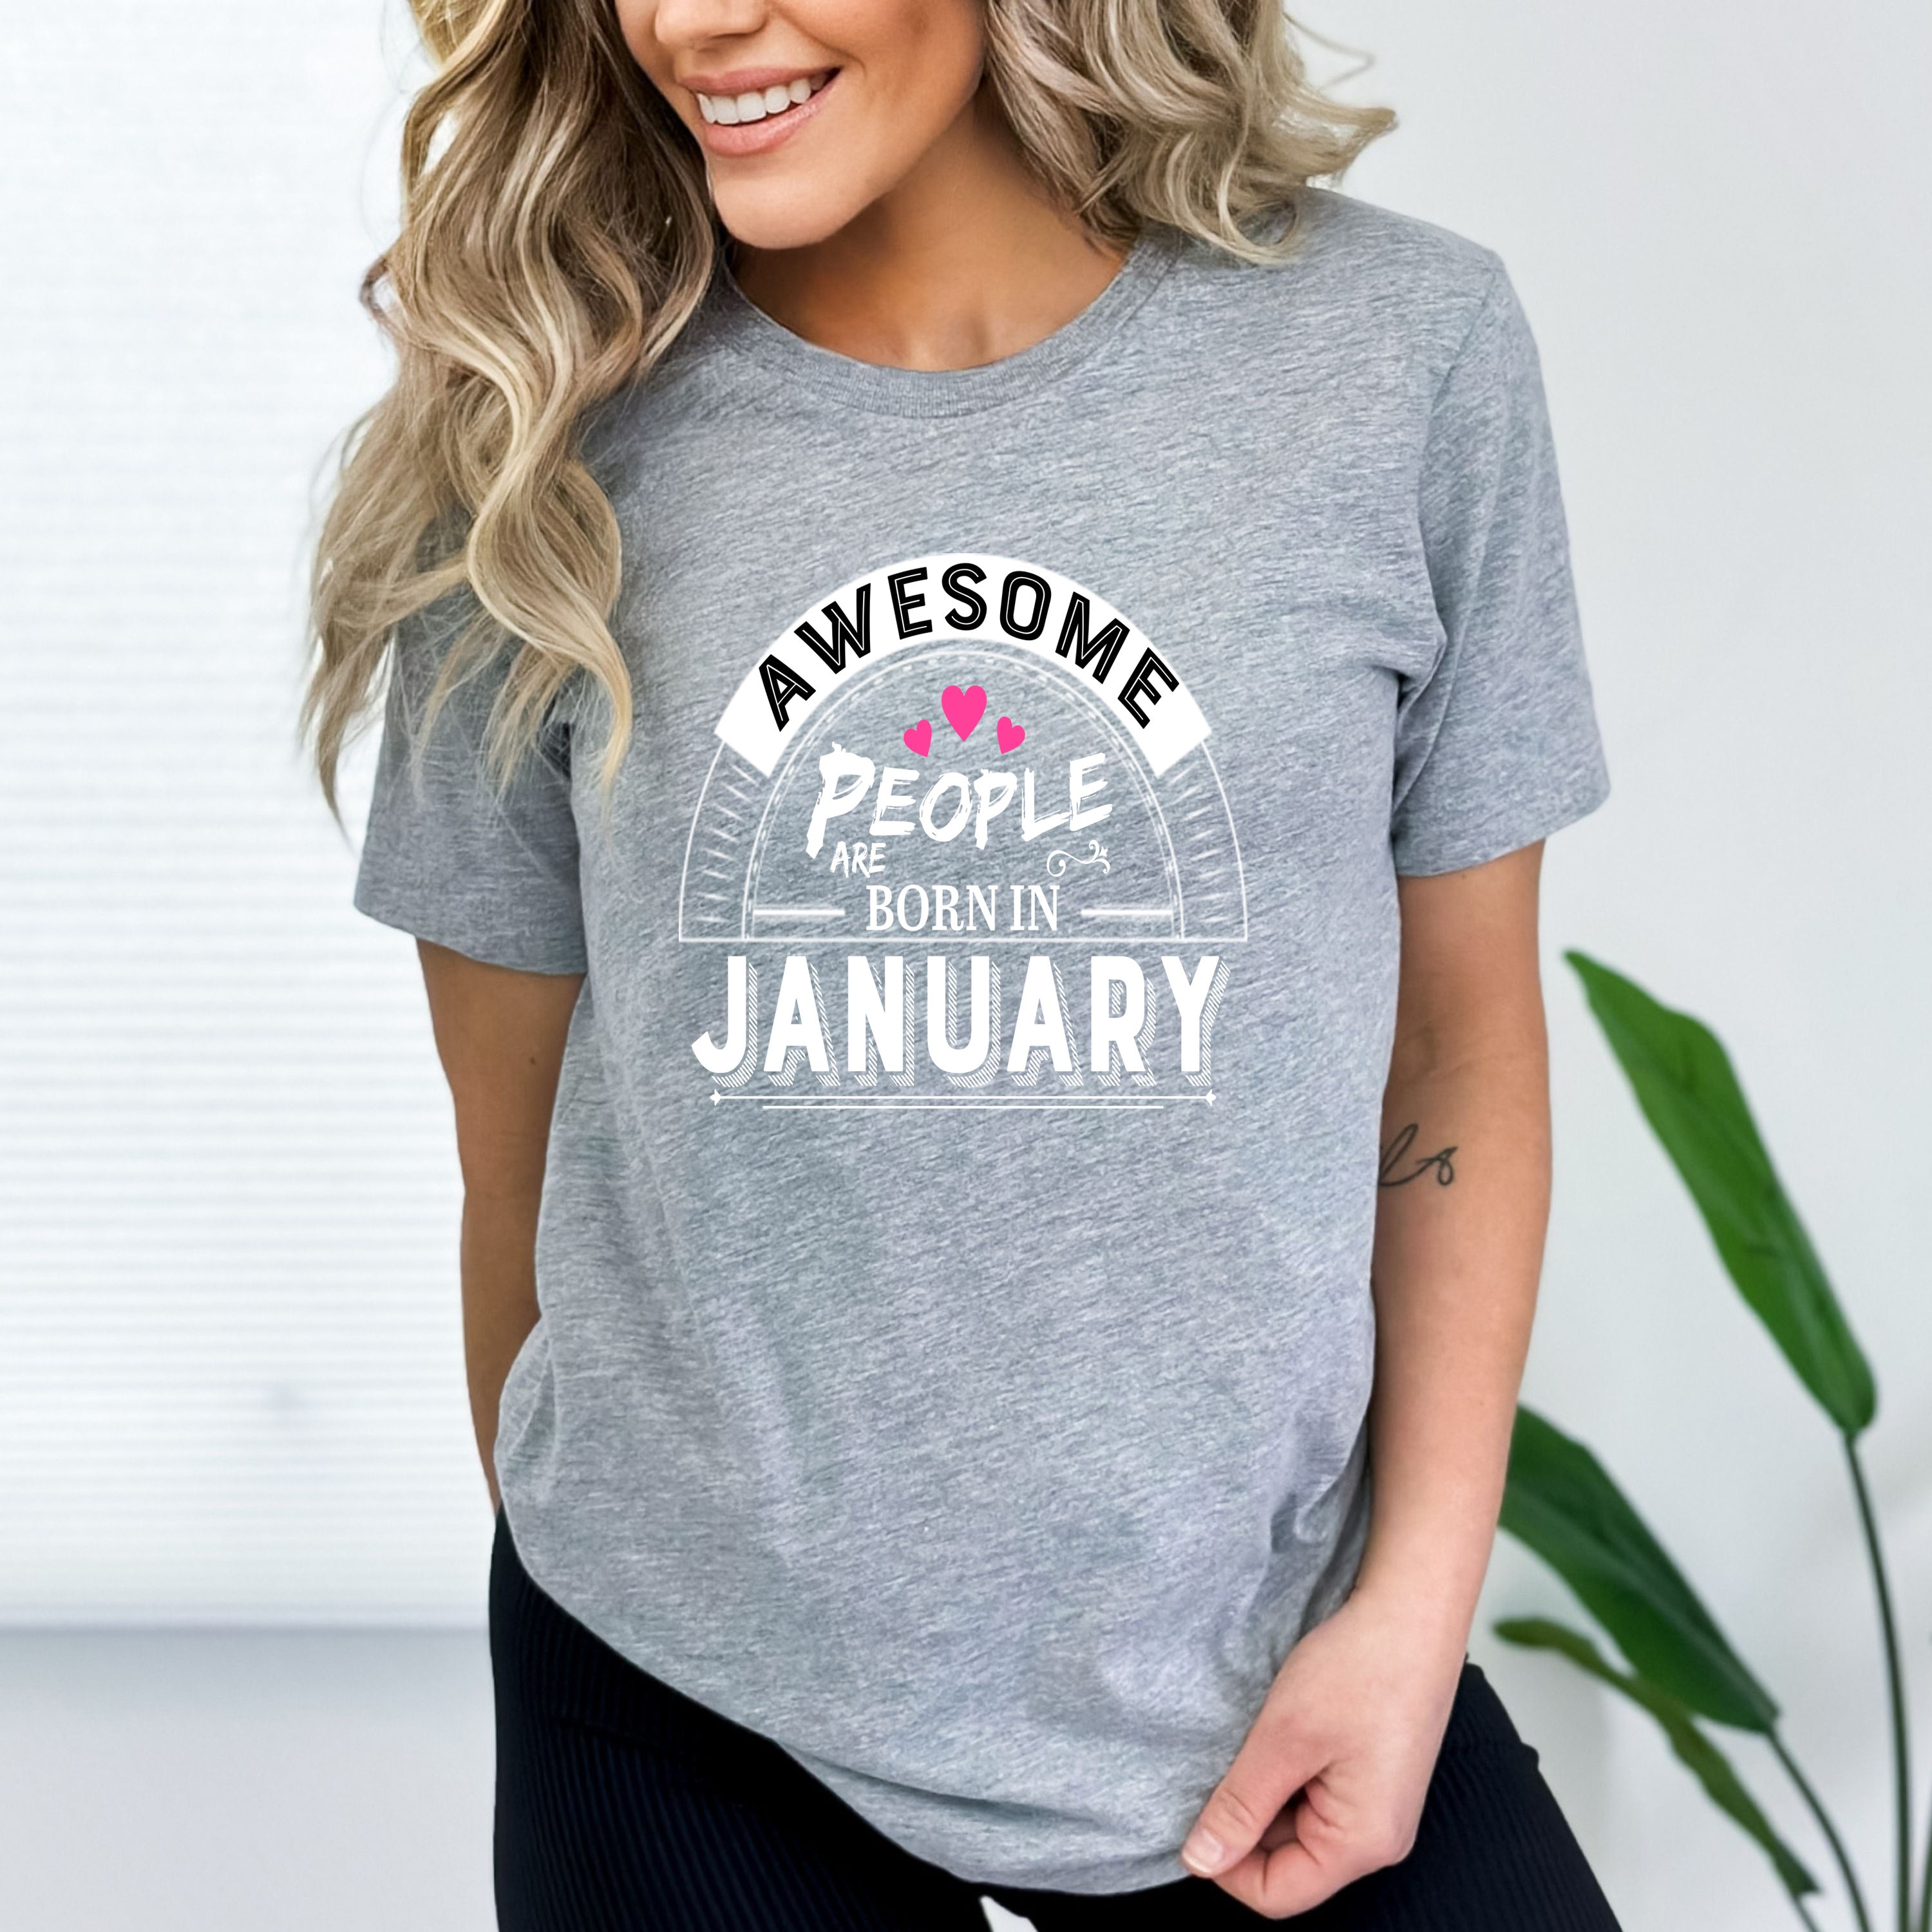 "Awesome People Are Born In January"